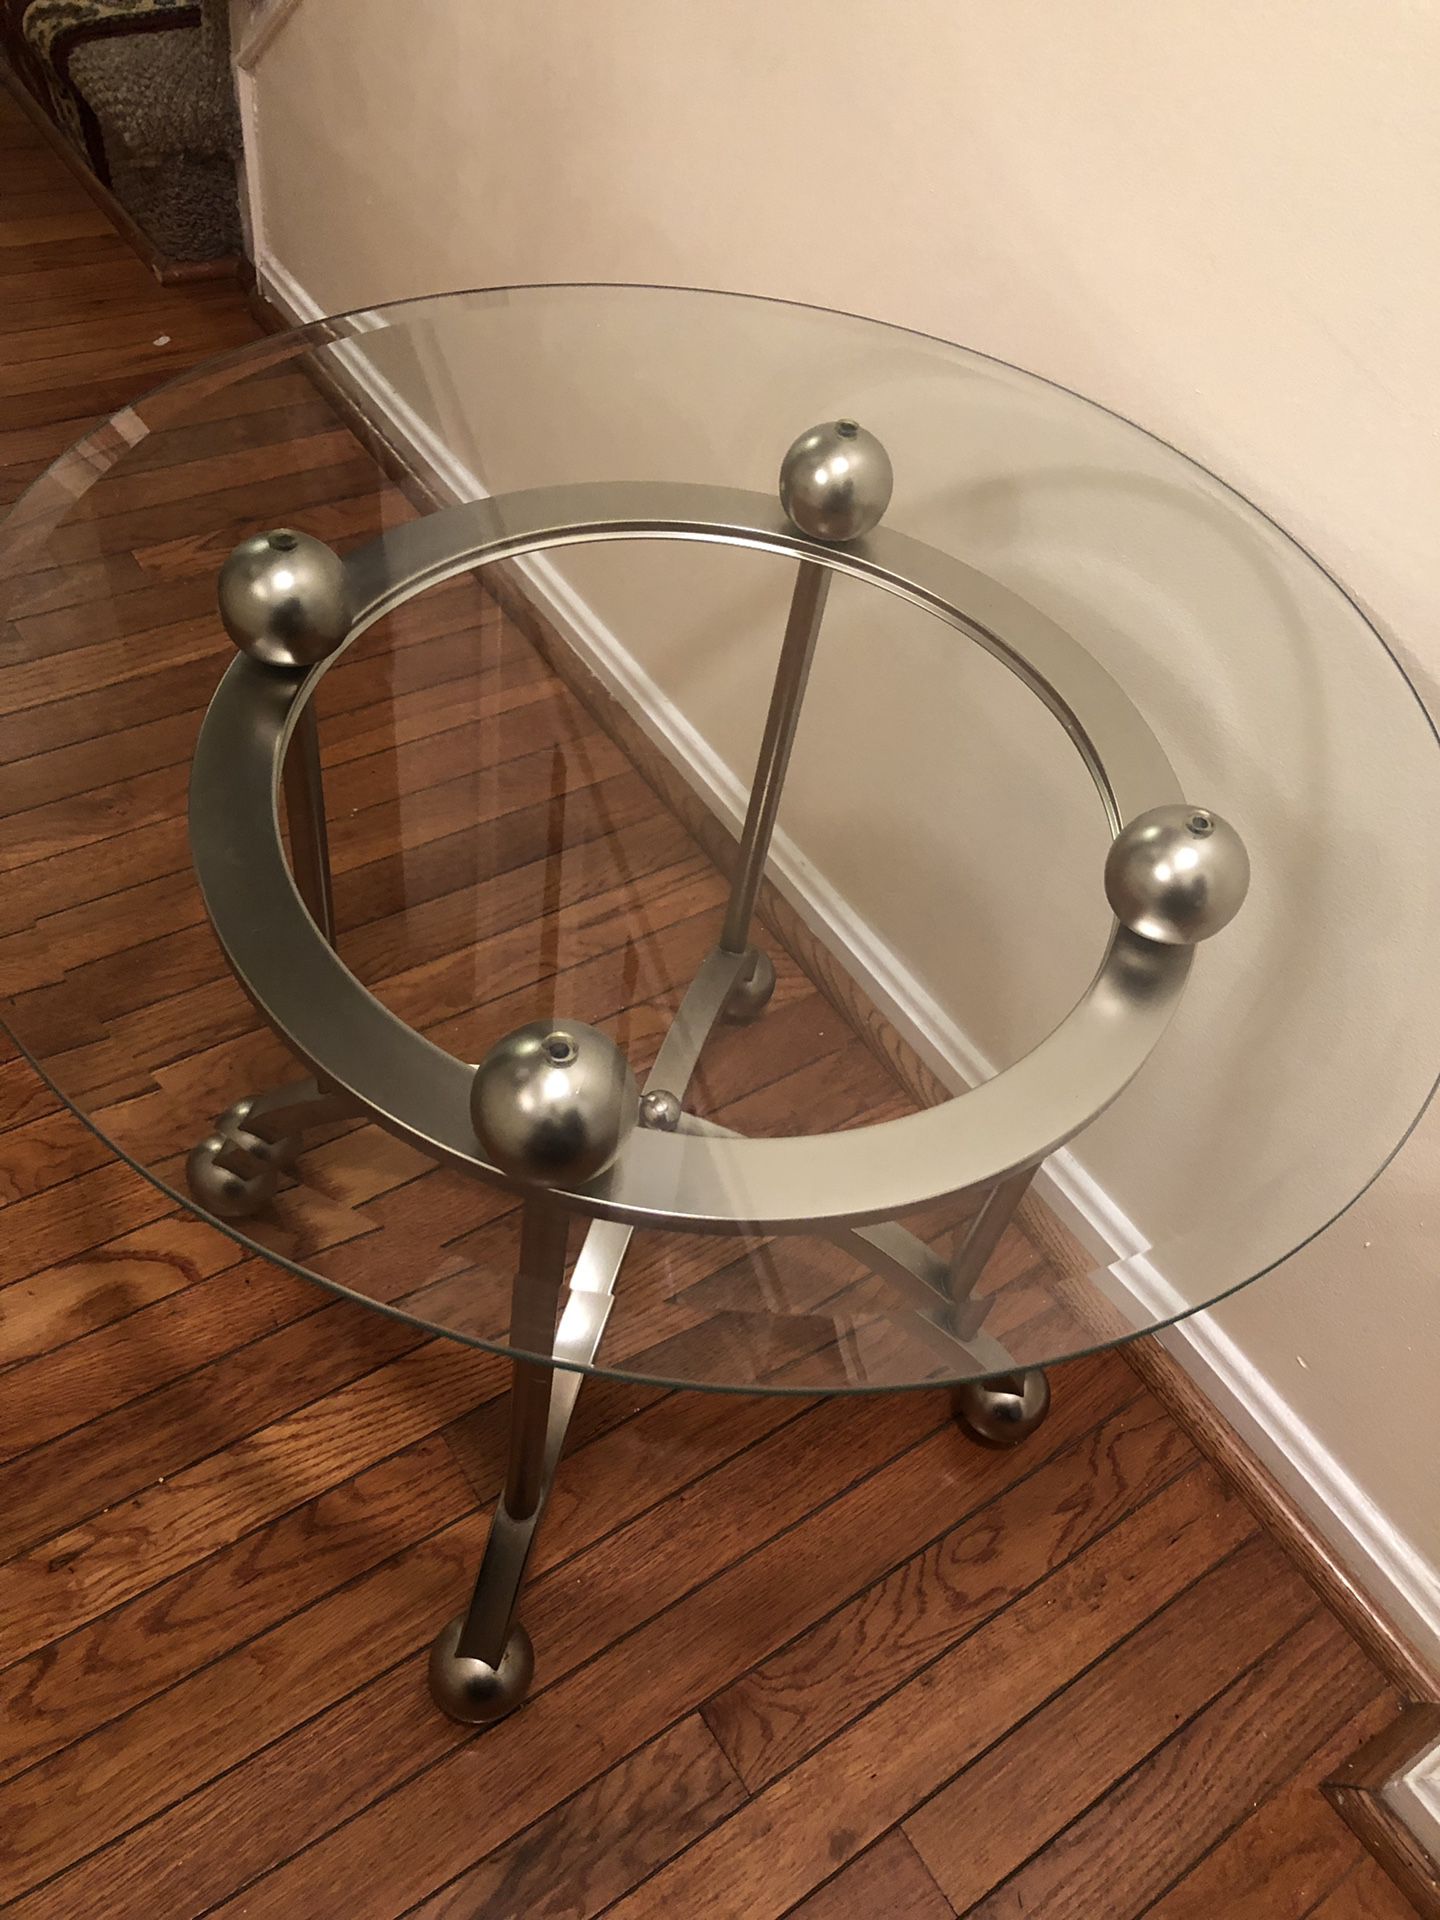 2 identical glass side table